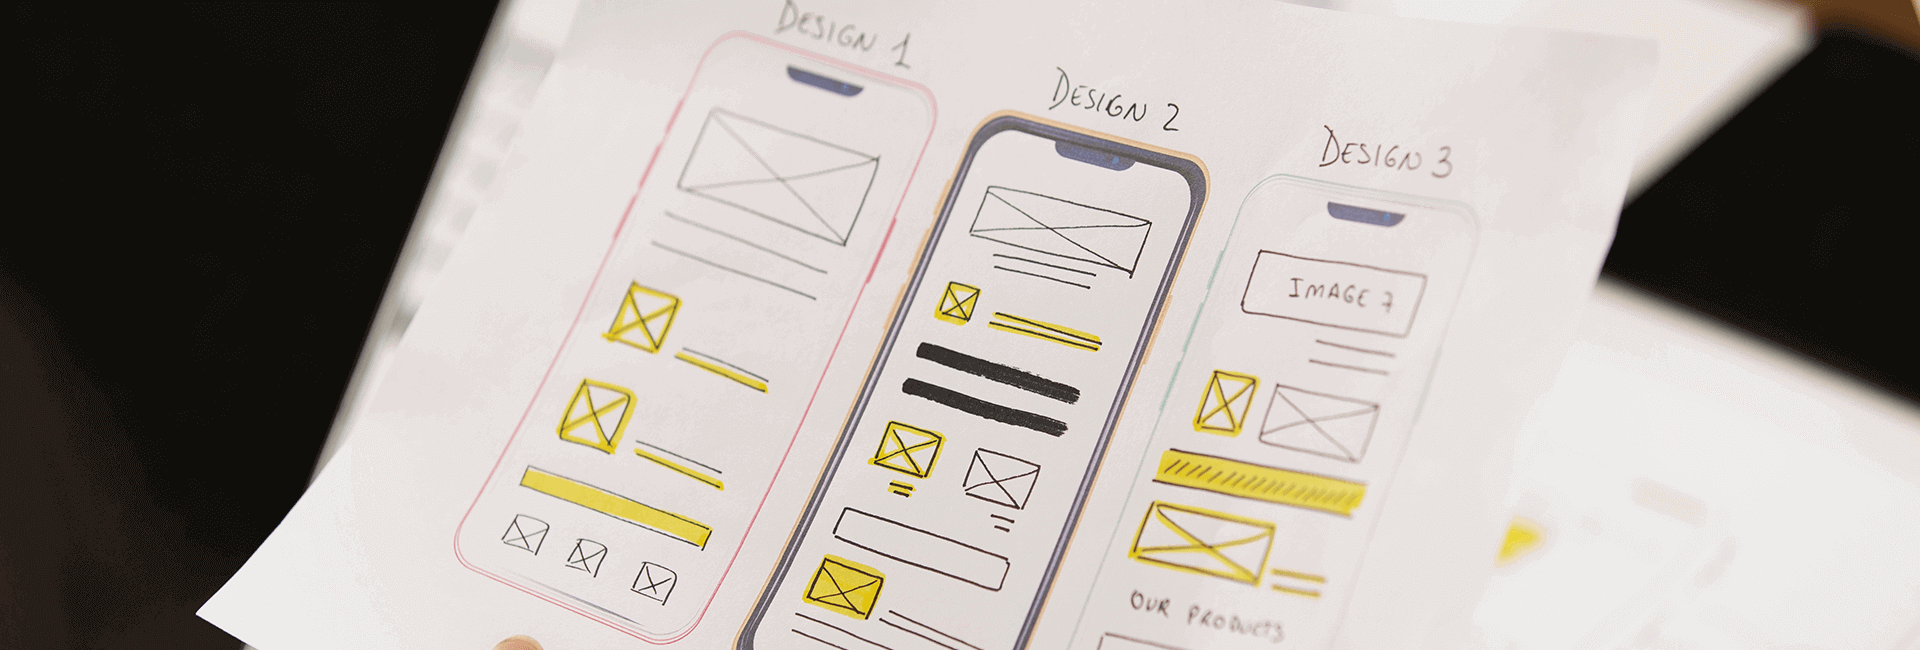 A Step-by-Step Guide to UI/UX Design Process